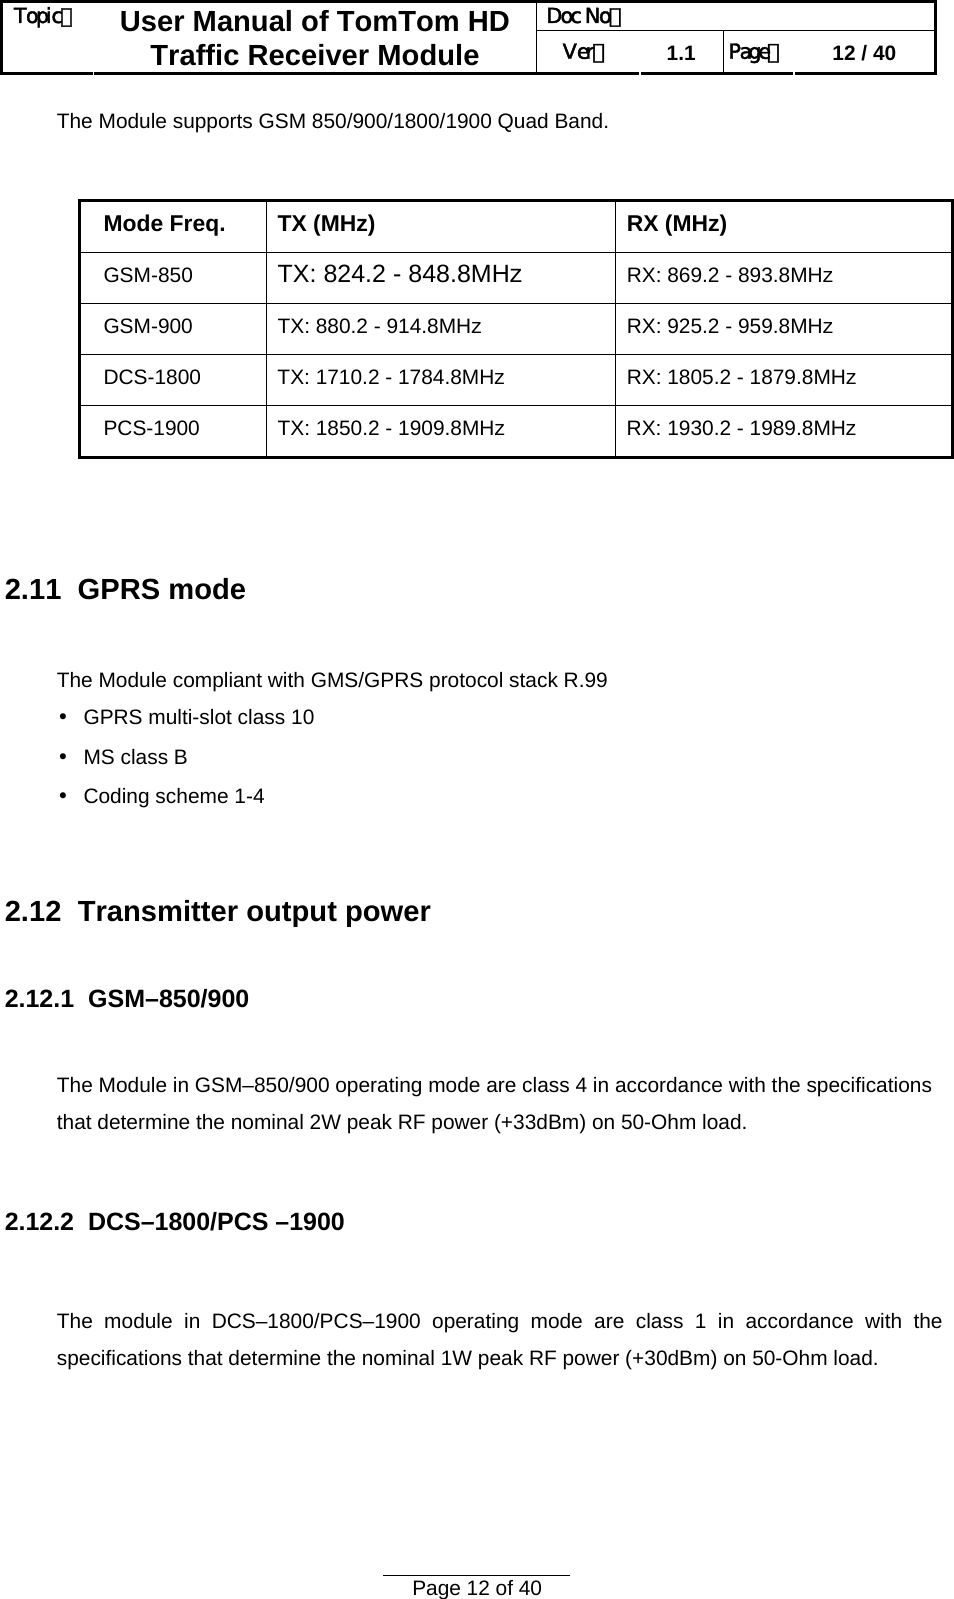 Doc No：  Topic：  User Manual of TomTom HD Traffic Receiver Module  Ver：  1.1  Page：  12 / 40  Page 12 of 40  The Module supports GSM 850/900/1800/1900 Quad Band.  Mode Freq. TX (MHz) RX (MHz) GSM-850  TX: 824.2 - 848.8MHz  RX: 869.2 - 893.8MHz GSM-900  TX: 880.2 - 914.8MHz  RX: 925.2 - 959.8MHz DCS-1800  TX: 1710.2 - 1784.8MHz  RX: 1805.2 - 1879.8MHz PCS-1900  TX: 1850.2 - 1909.8MHz  RX: 1930.2 - 1989.8MHz   2.11  GPRS mode  The Module compliant with GMS/GPRS protocol stack R.99 • GPRS multi-slot class 10 • MS class B • Coding scheme 1-4   2.12  Transmitter output power  2.12.1  GSM–850/900  The Module in GSM–850/900 operating mode are class 4 in accordance with the specifications that determine the nominal 2W peak RF power (+33dBm) on 50-Ohm load.  2.12.2  DCS–1800/PCS –1900  The module in DCS–1800/PCS–1900 operating mode are class 1 in accordance with the specifications that determine the nominal 1W peak RF power (+30dBm) on 50-Ohm load.   